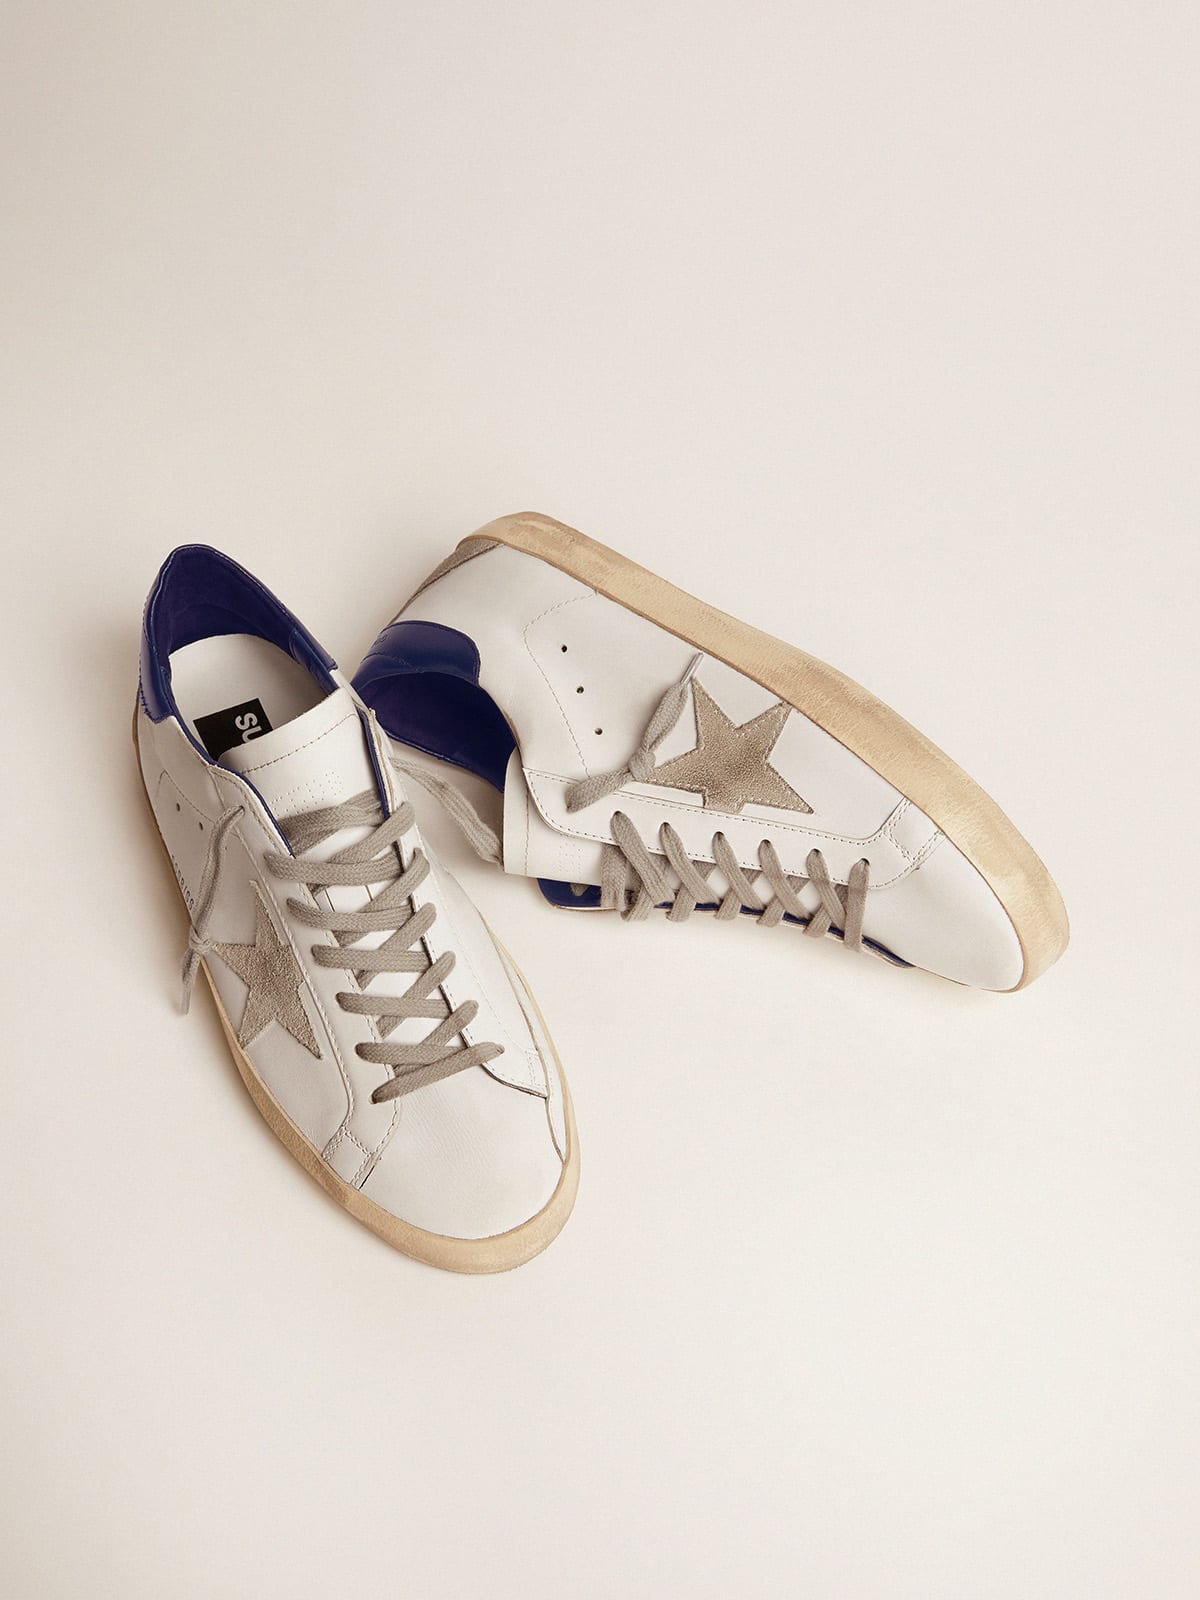 midnat filthy hule Women's blue and white Super-Star sneakers | Golden Goose